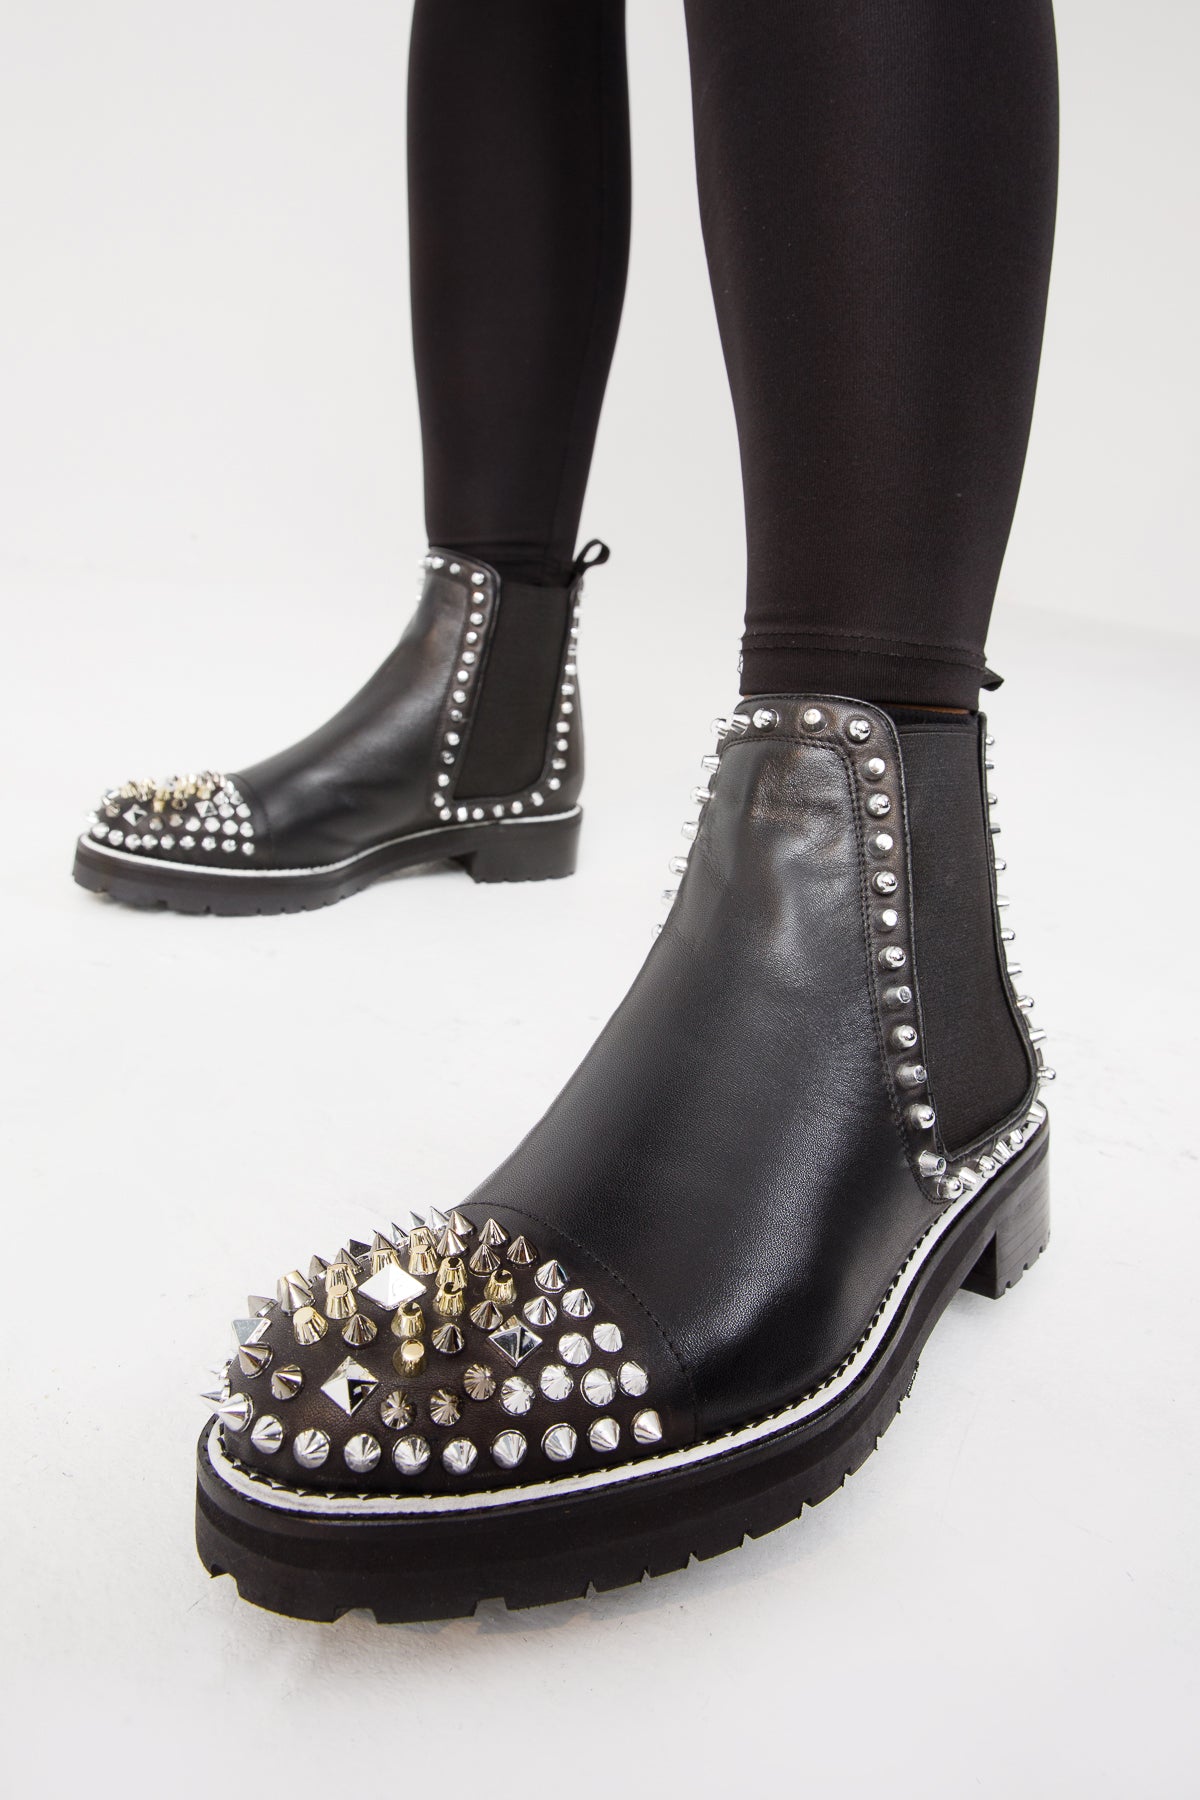 The Vuvulane Black Spike Leather Ankle Women Boot